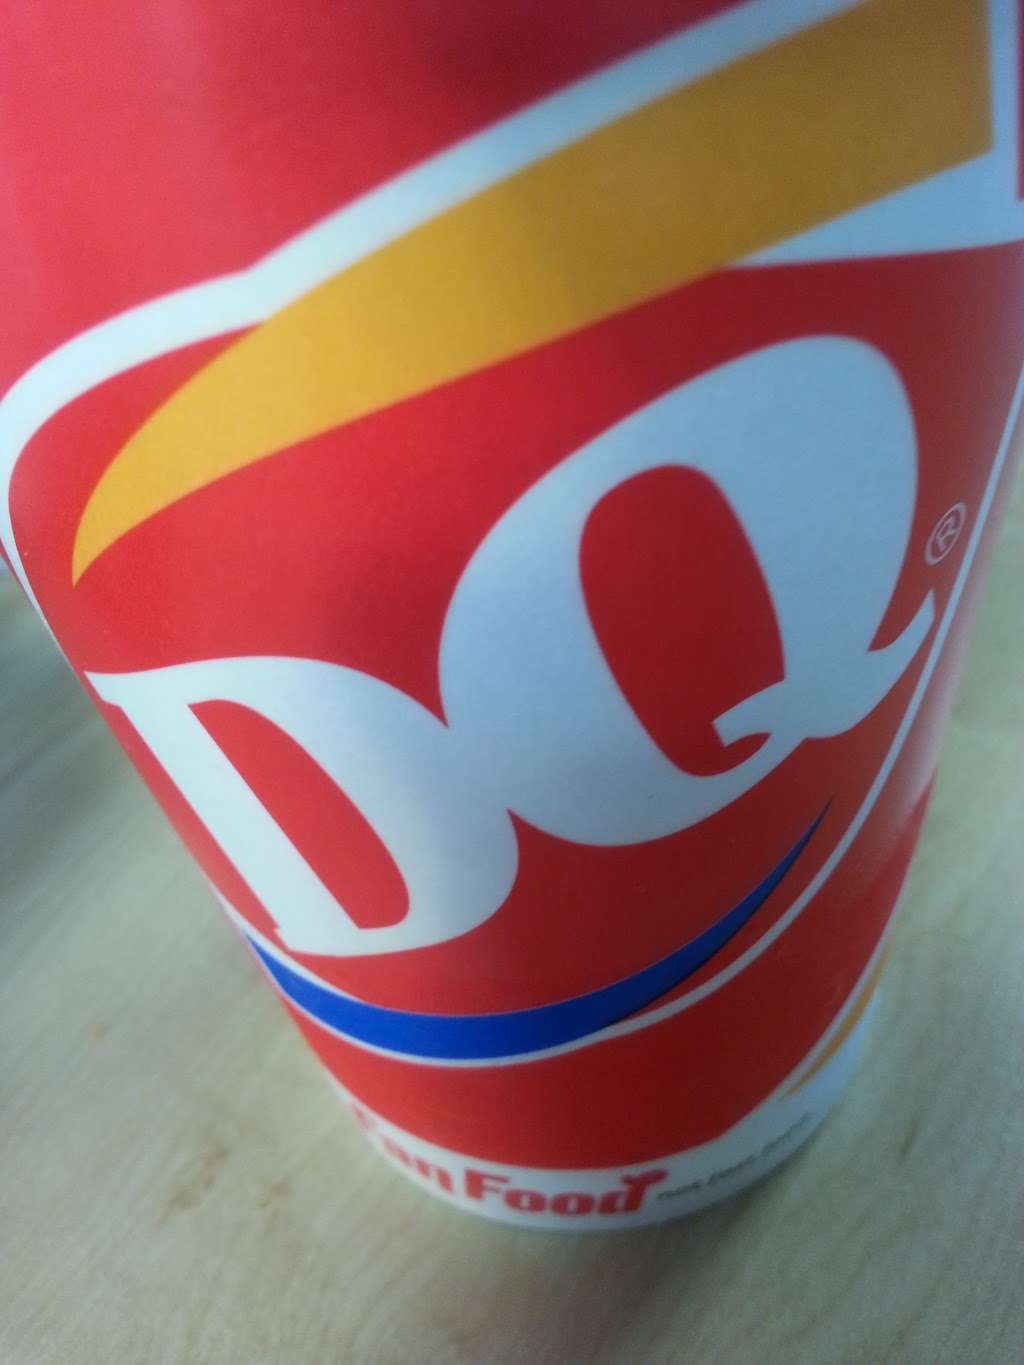 Dairy Queen Grill & Chill | 7515 Rockville Rd, Indianapolis, IN 46214, USA | Phone: (317) 271-9193